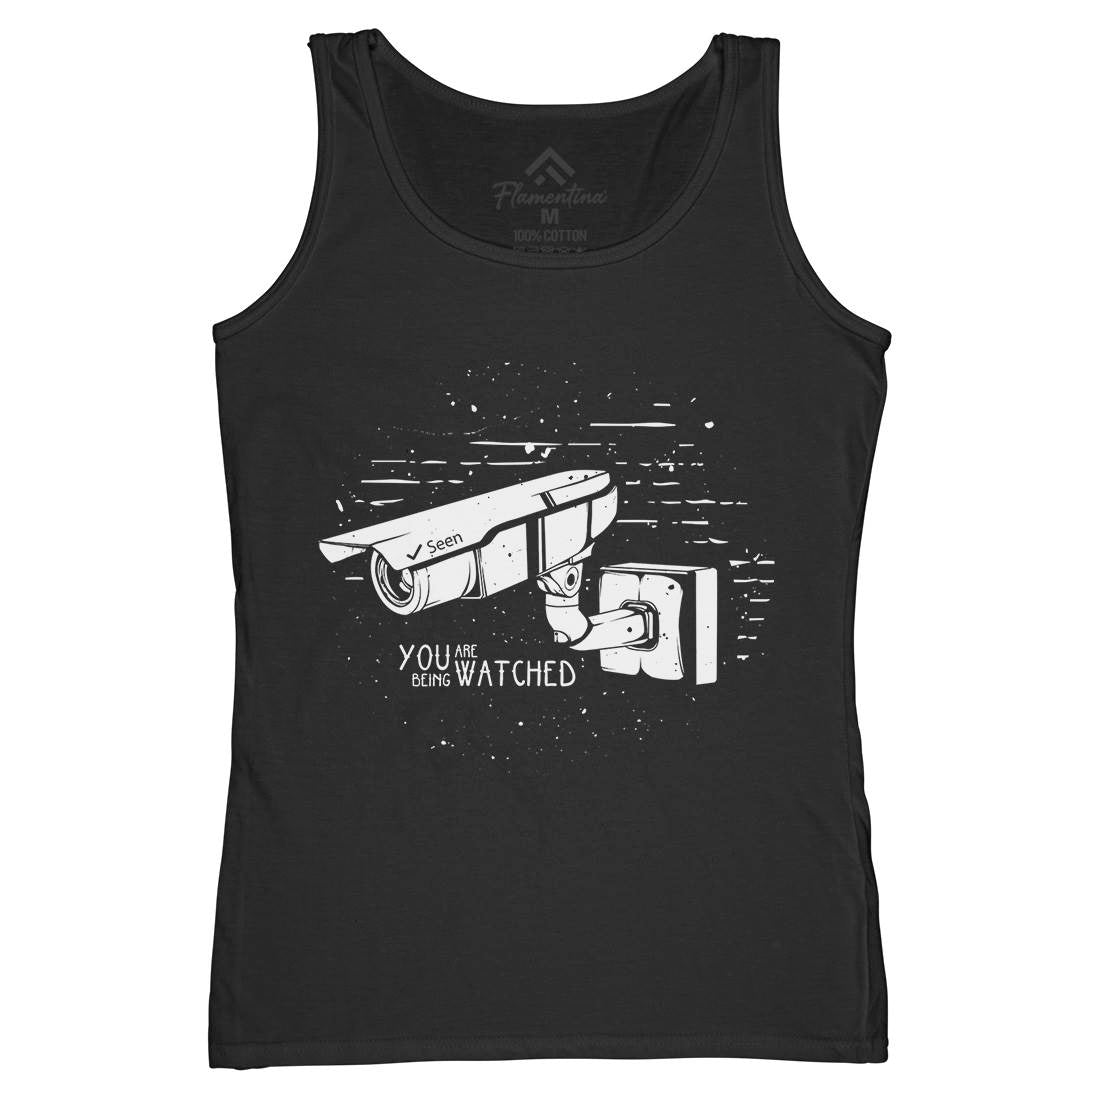 You Are Being Watched Womens Organic Tank Top Vest Media D499